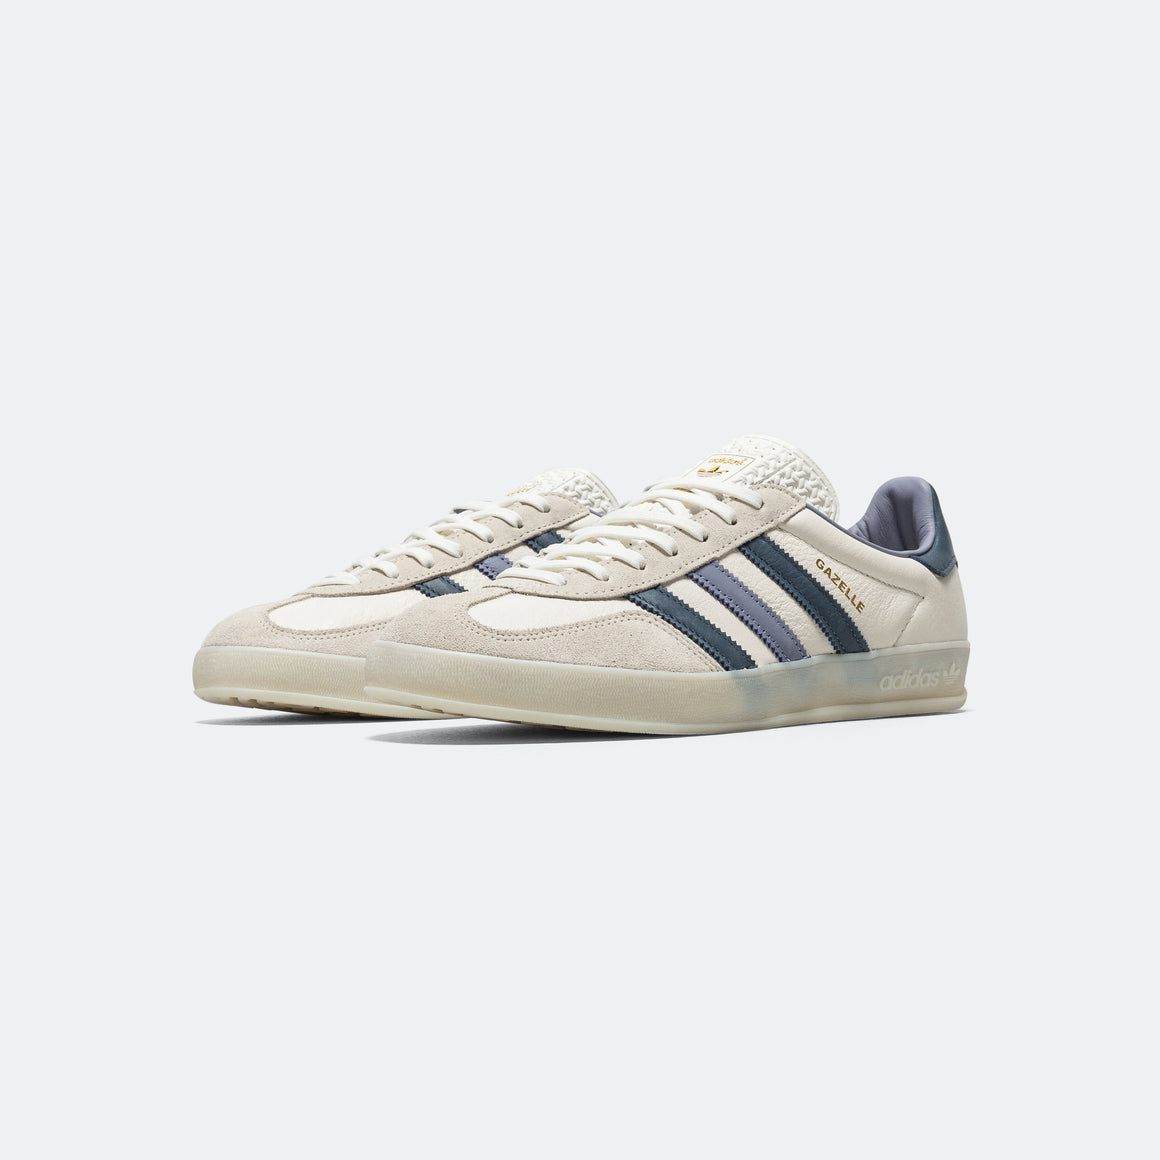 adidas - Gazelle Indoor - Core White/Preloved Ink - UP THERE